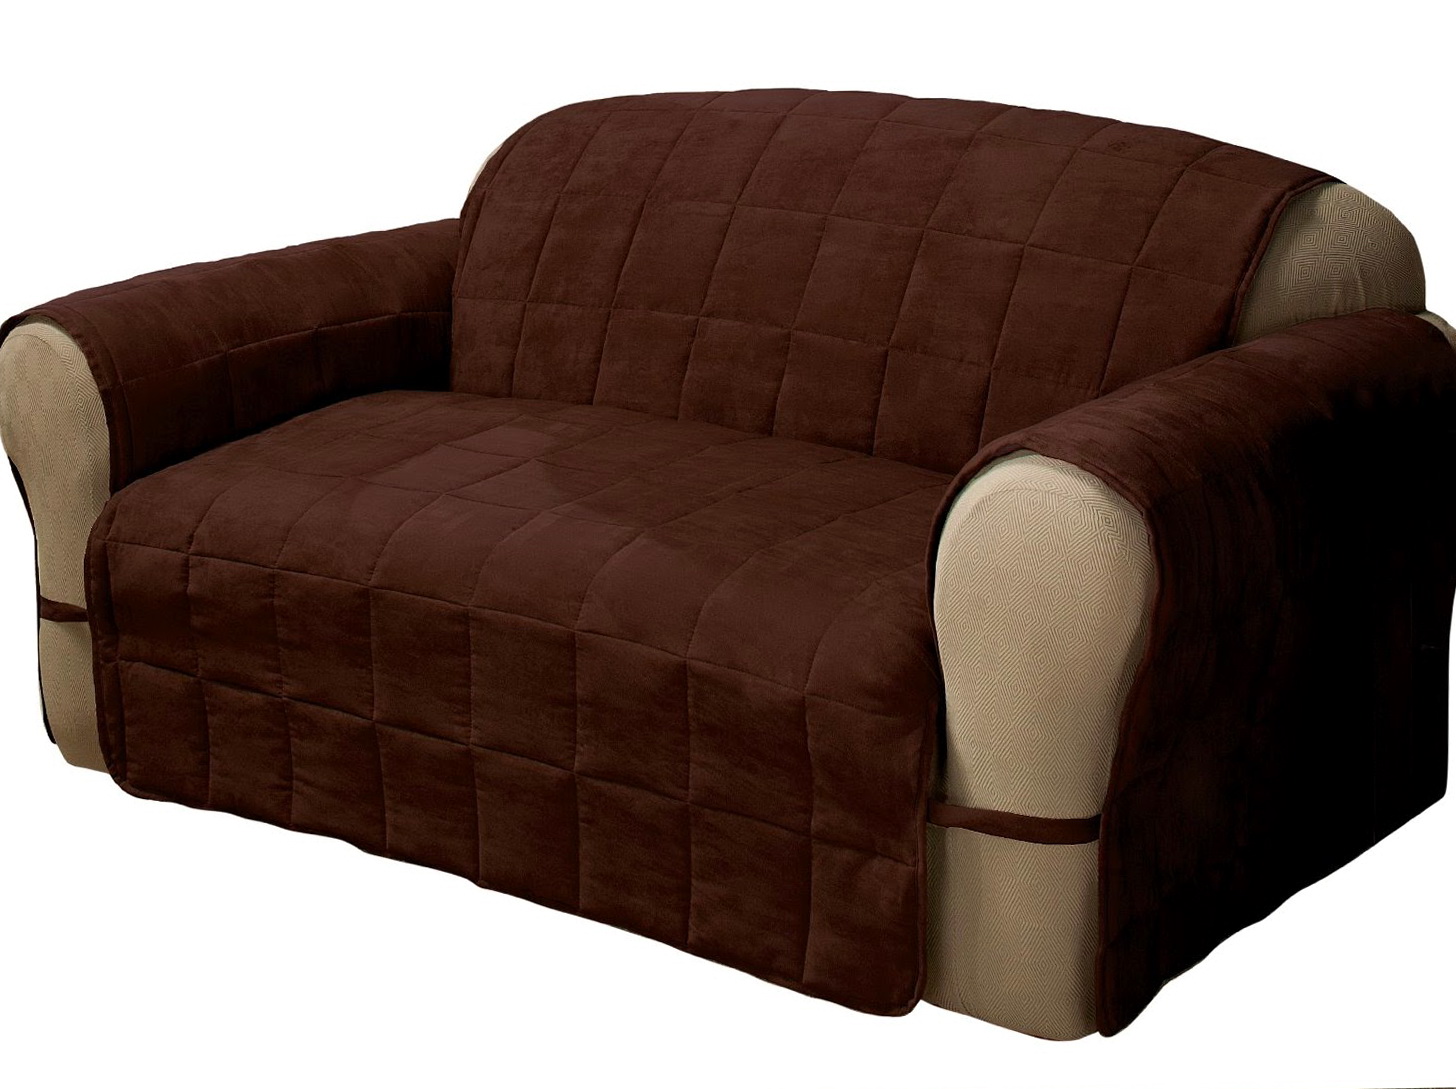 sofa cover made of leather